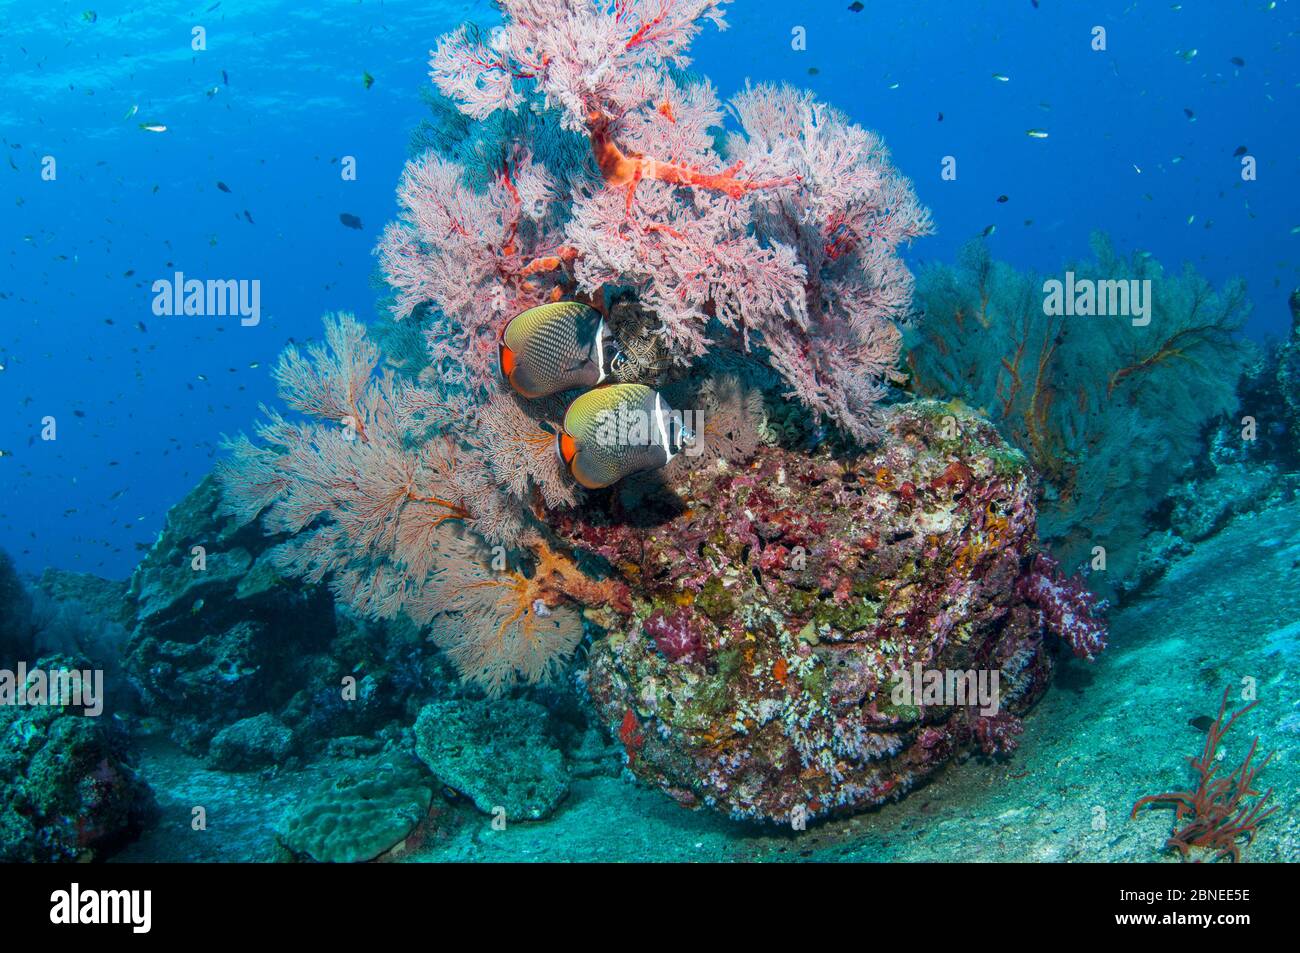 Pair of Redtail butterflyfish (Chaetodon collare) with a Gorgonian sea fan (Melithaea sp.) Andaman Sea, Thailand. Stock Photo